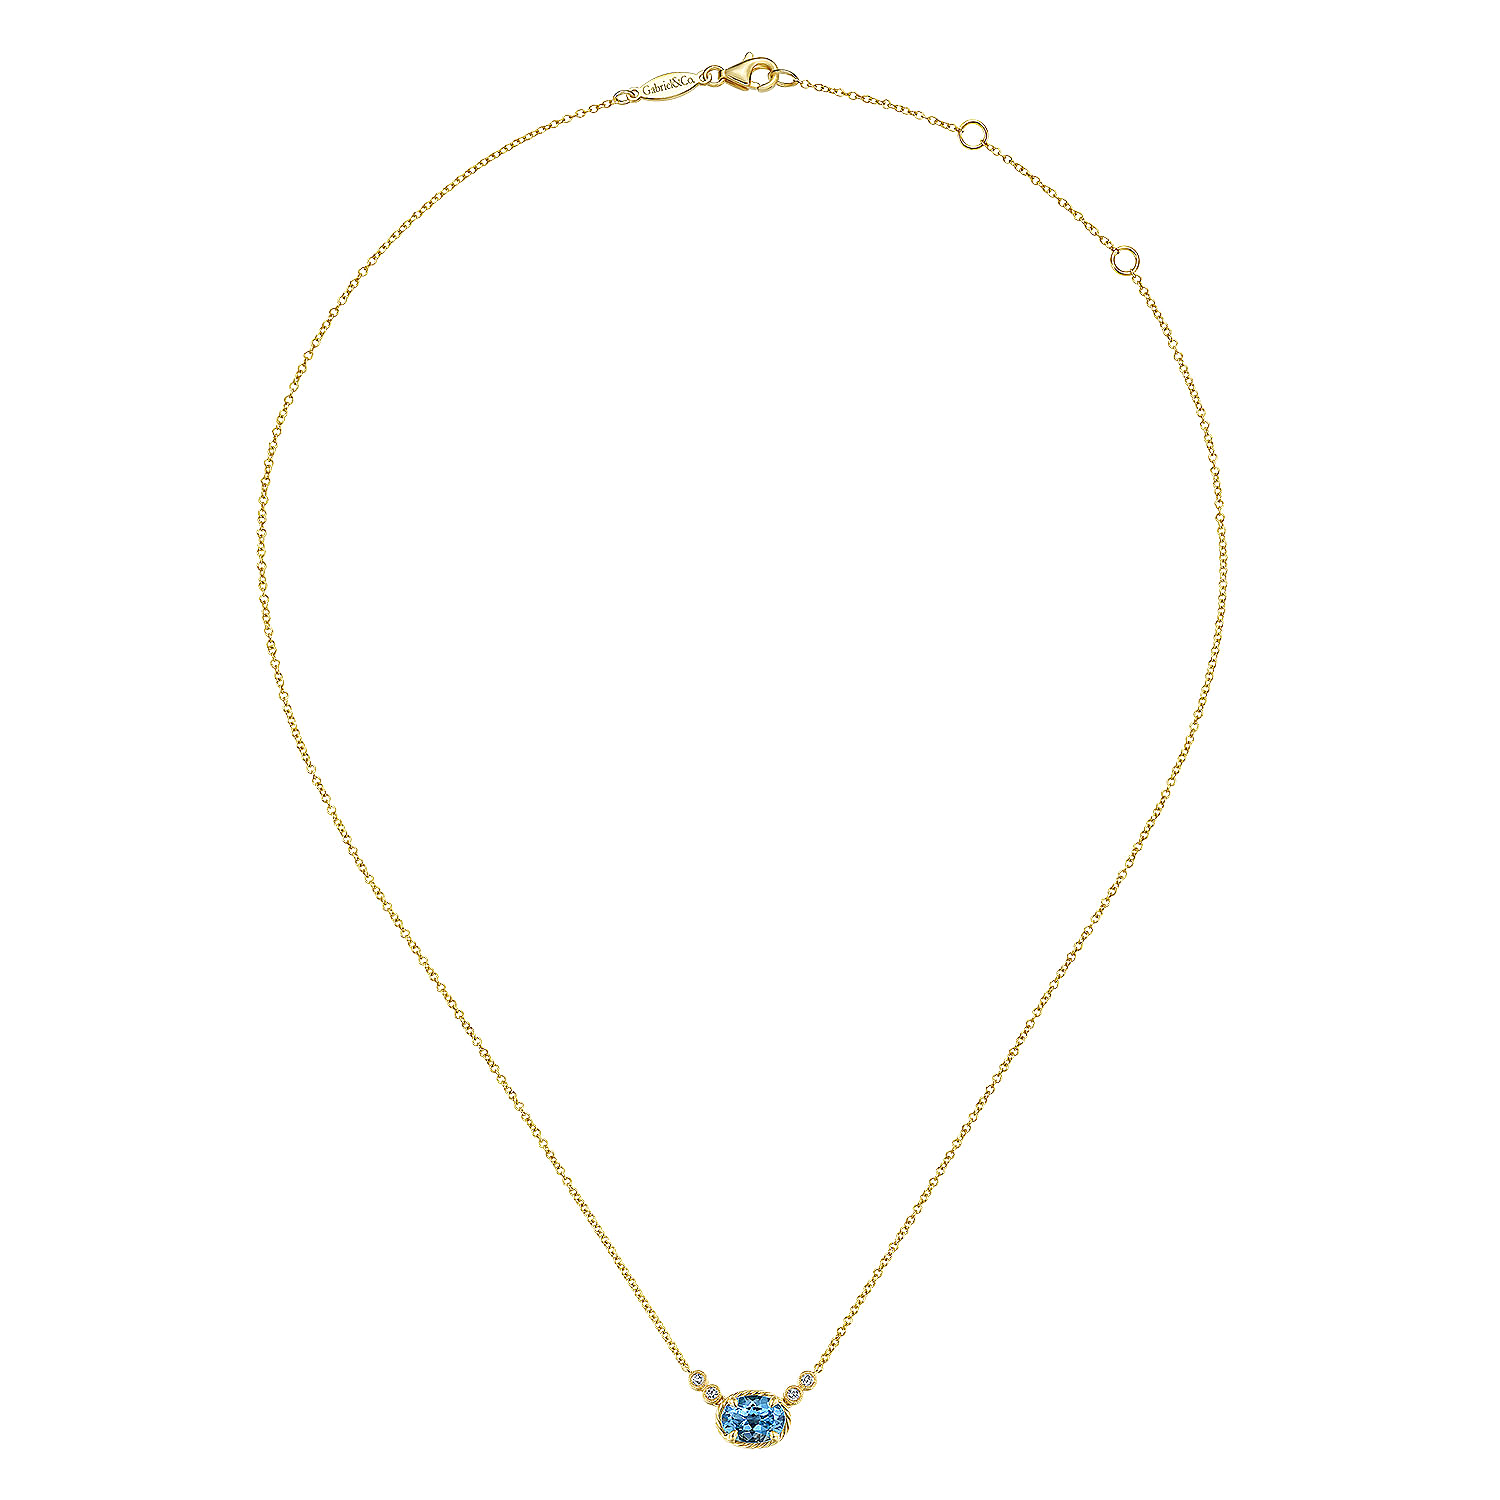 14K Yellow Gold Oval Swiss Blue Topaz Pendant Necklace with Diamond Accents